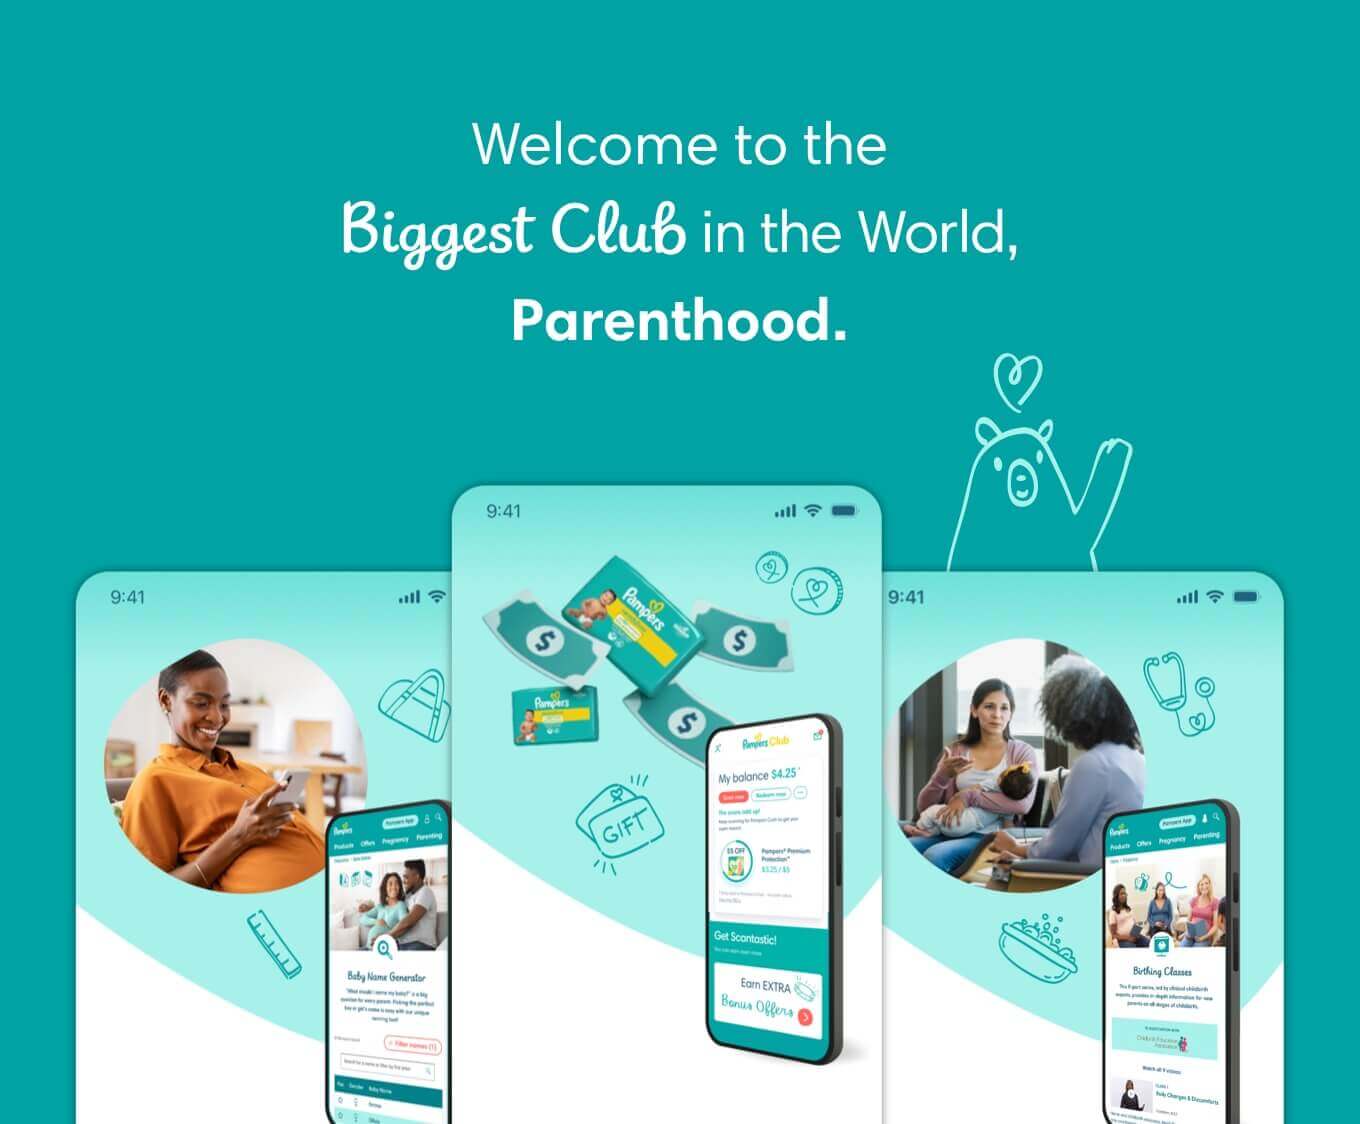 Welcome to the Biggest Club in the World Parenthood.